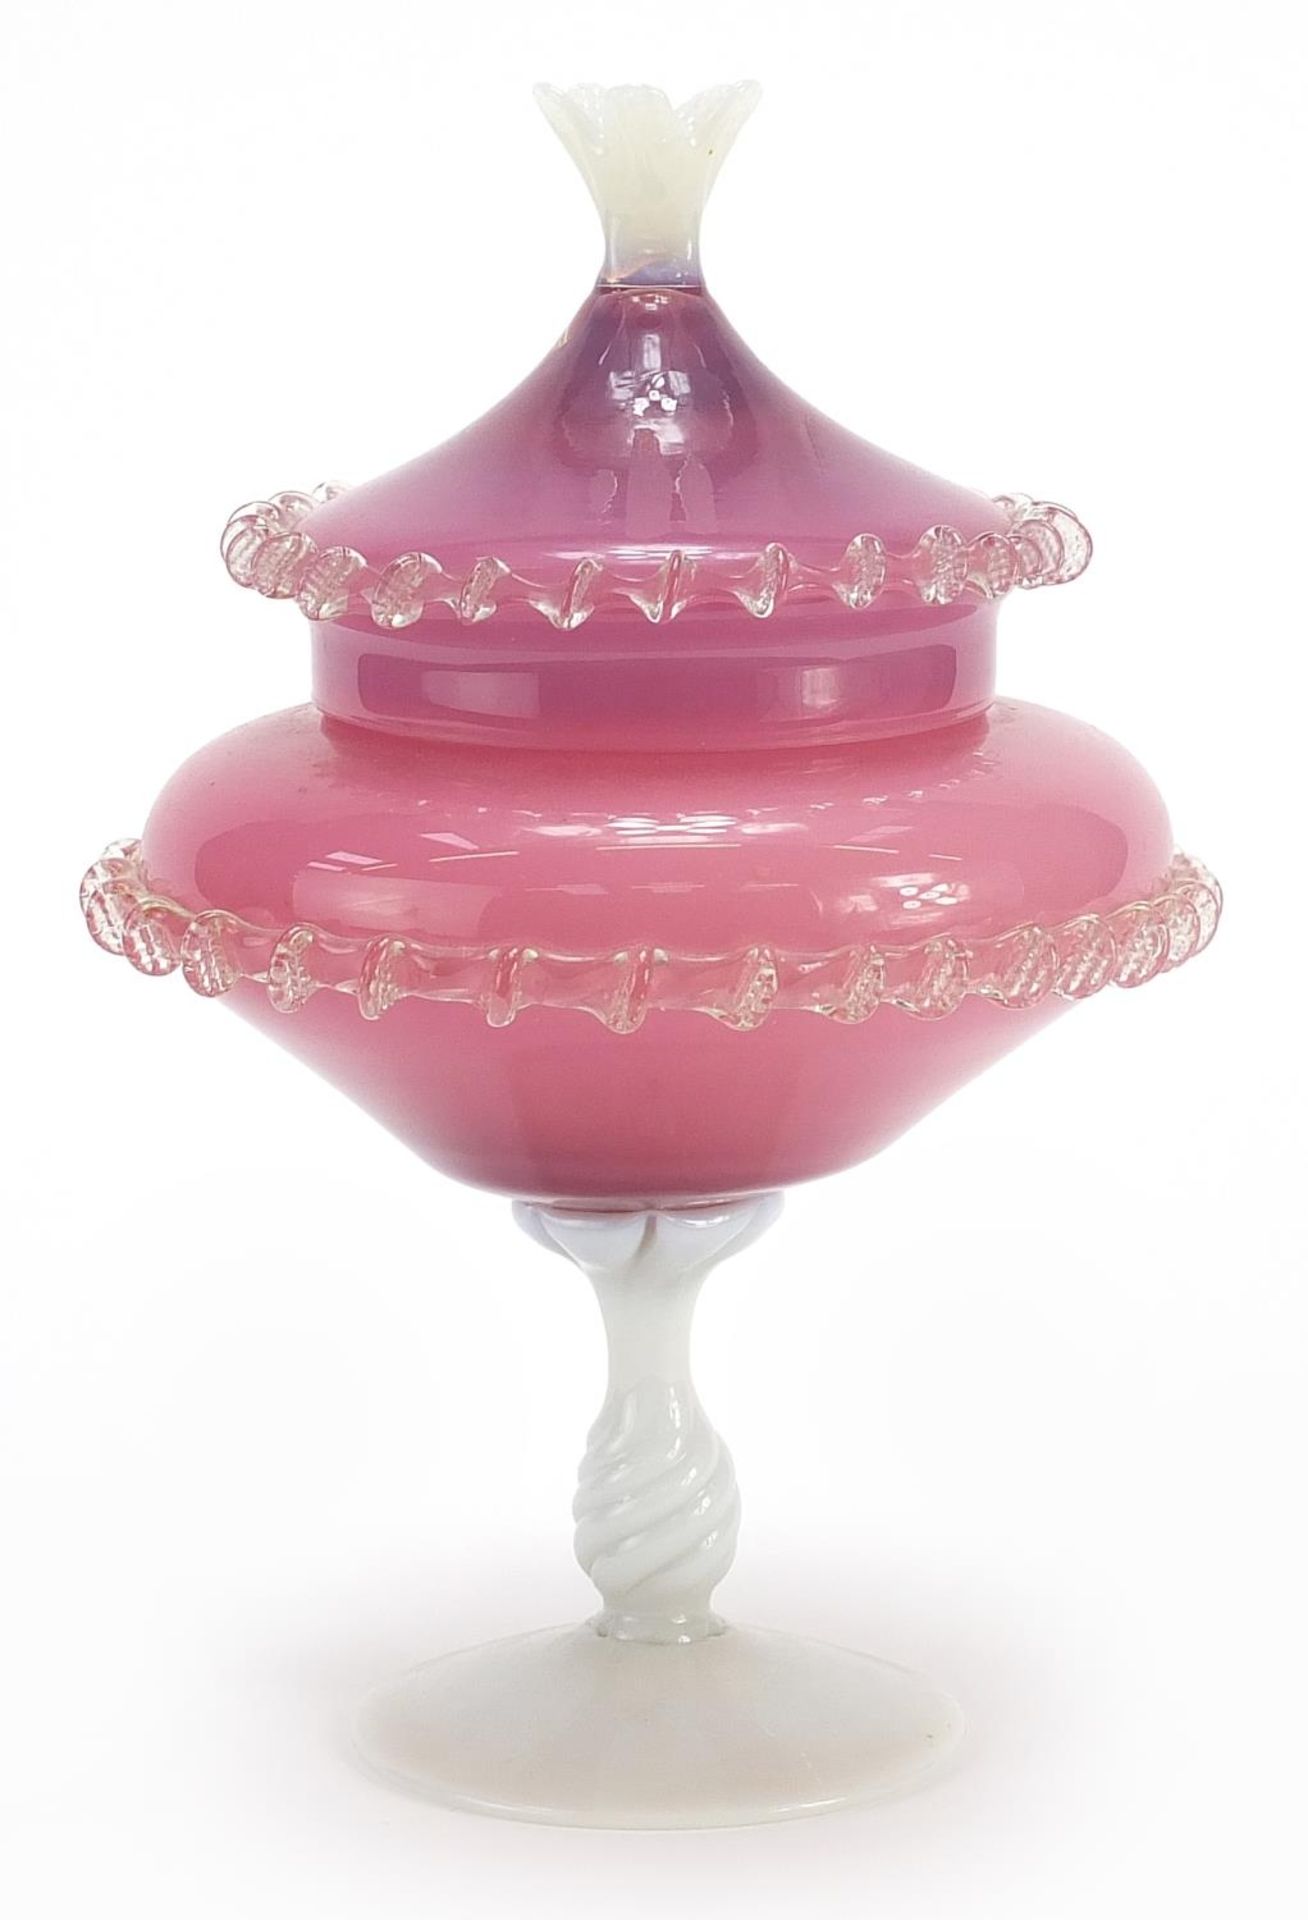 Vaseline and pink glass centerpiece and cover with frilled decoration, 30cm high - Image 2 of 4